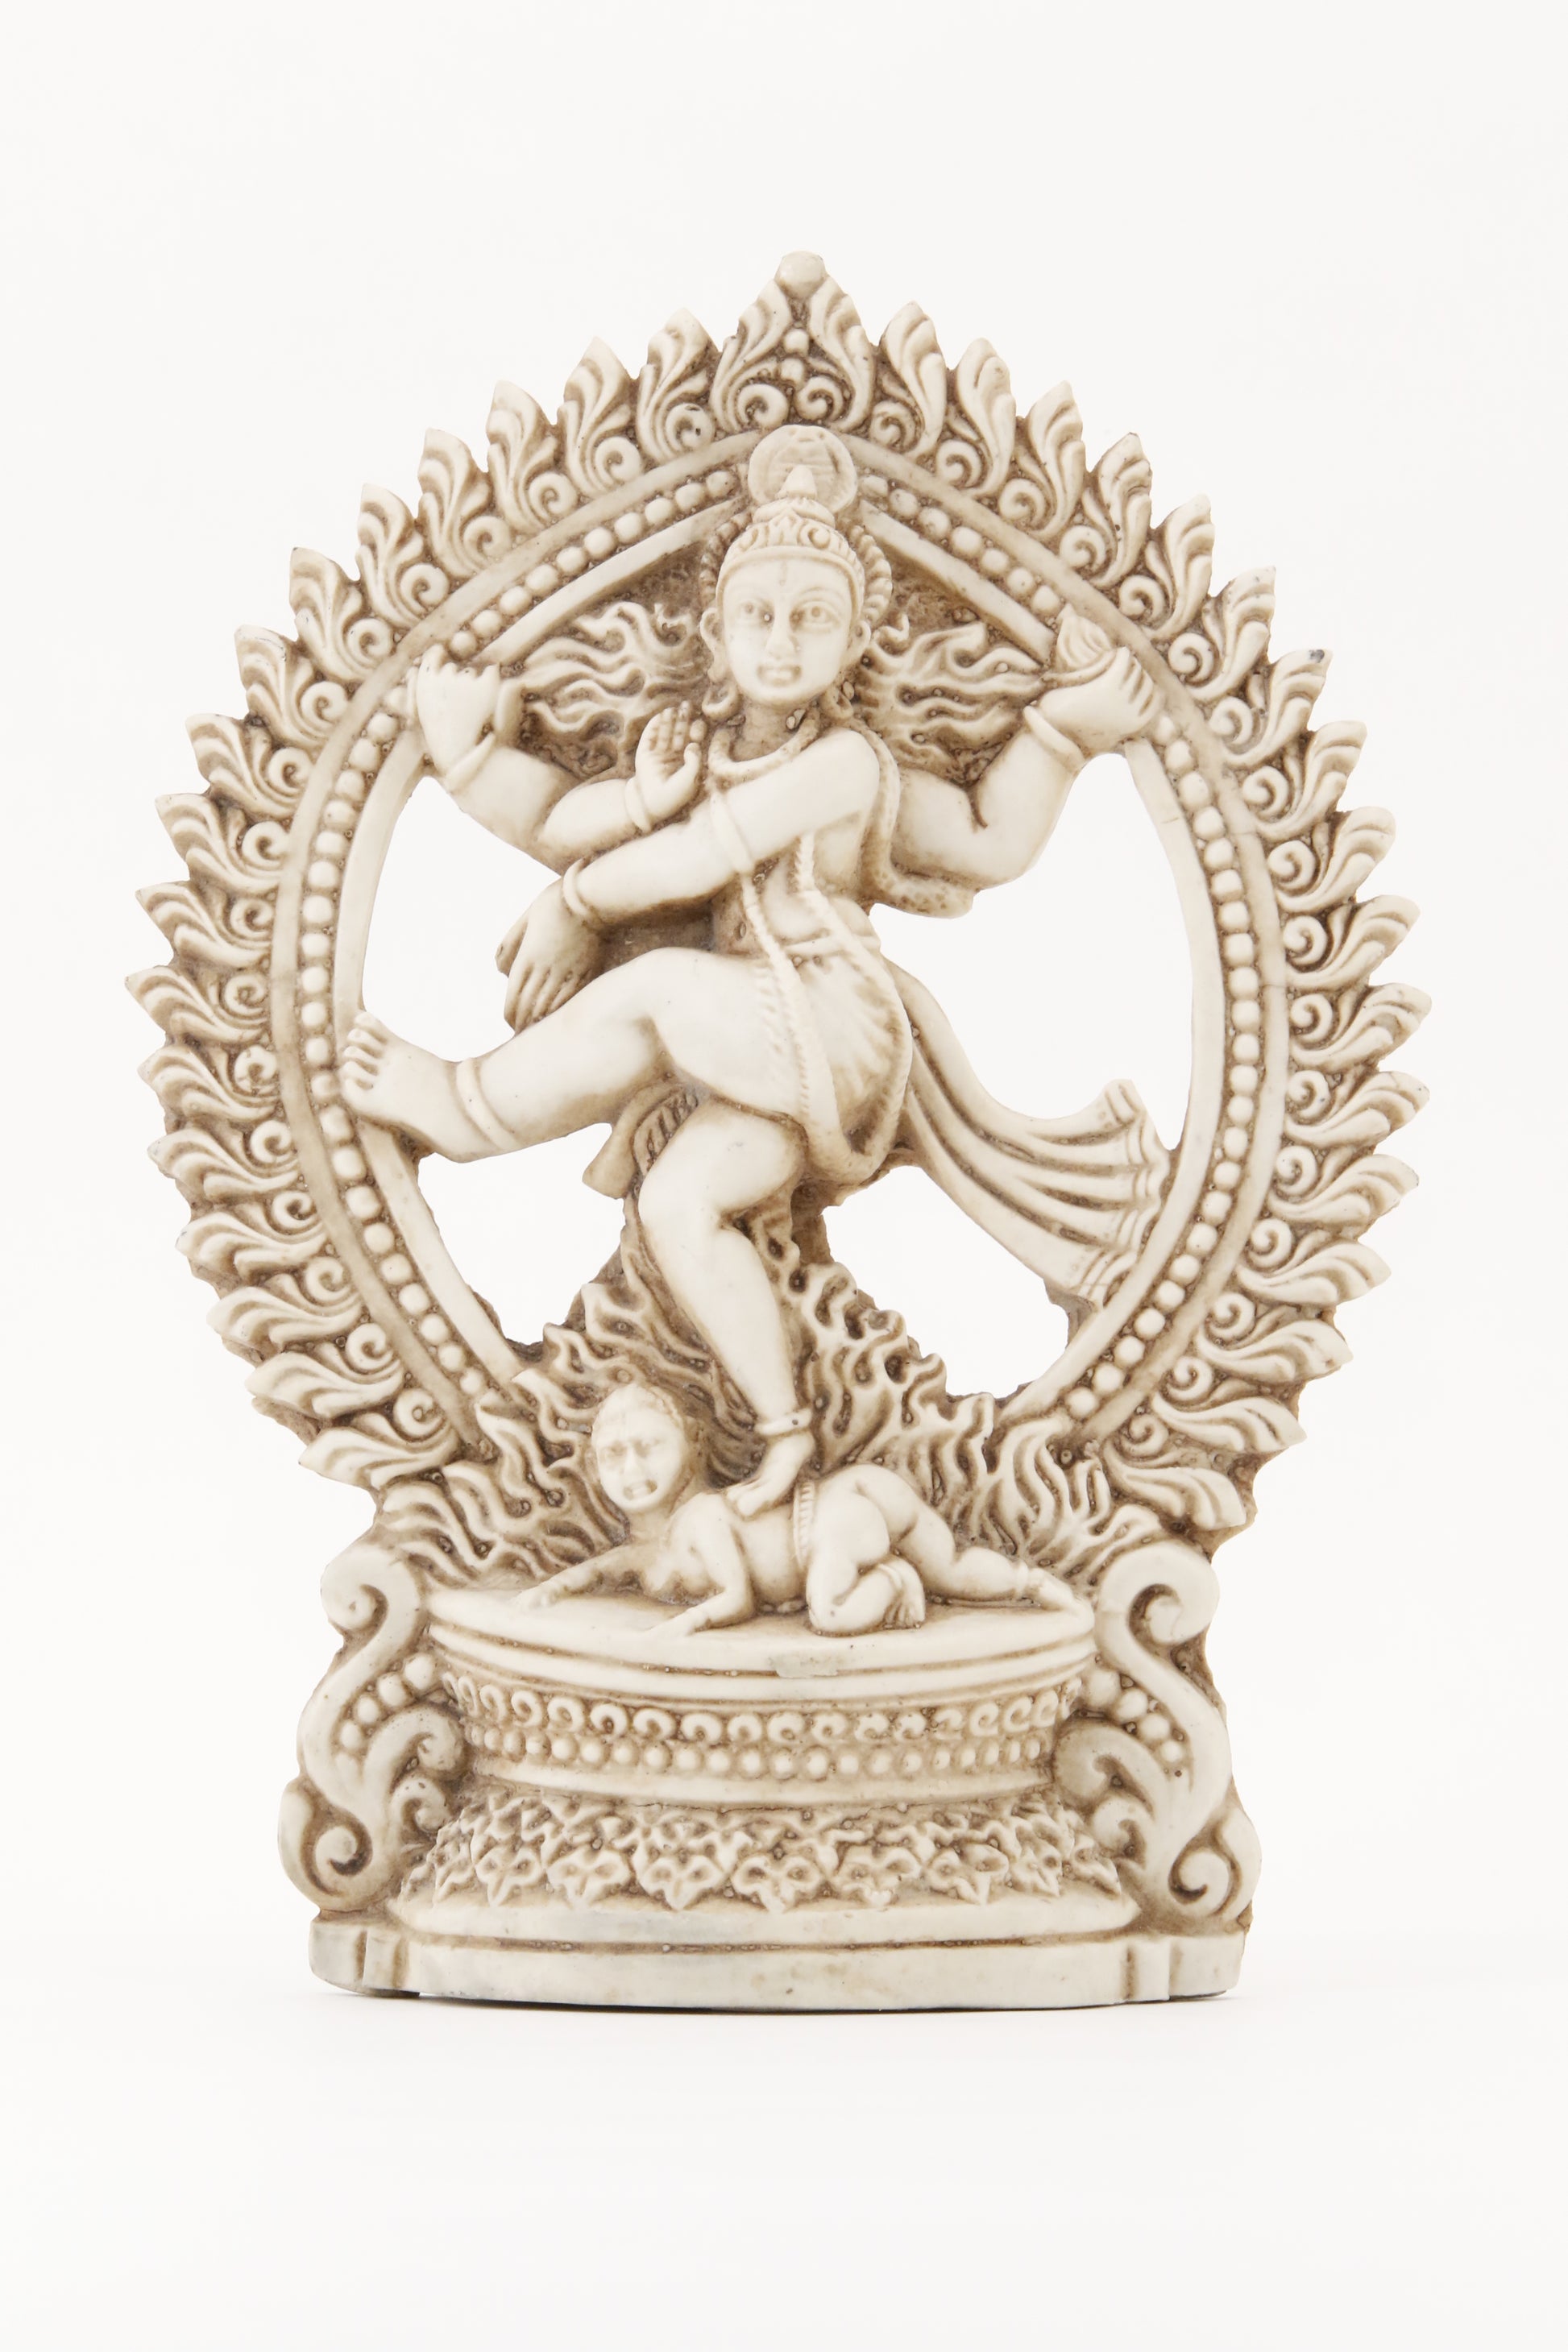 SHIVA DANCING POSE STATUE LIGHT FRONT VIEW